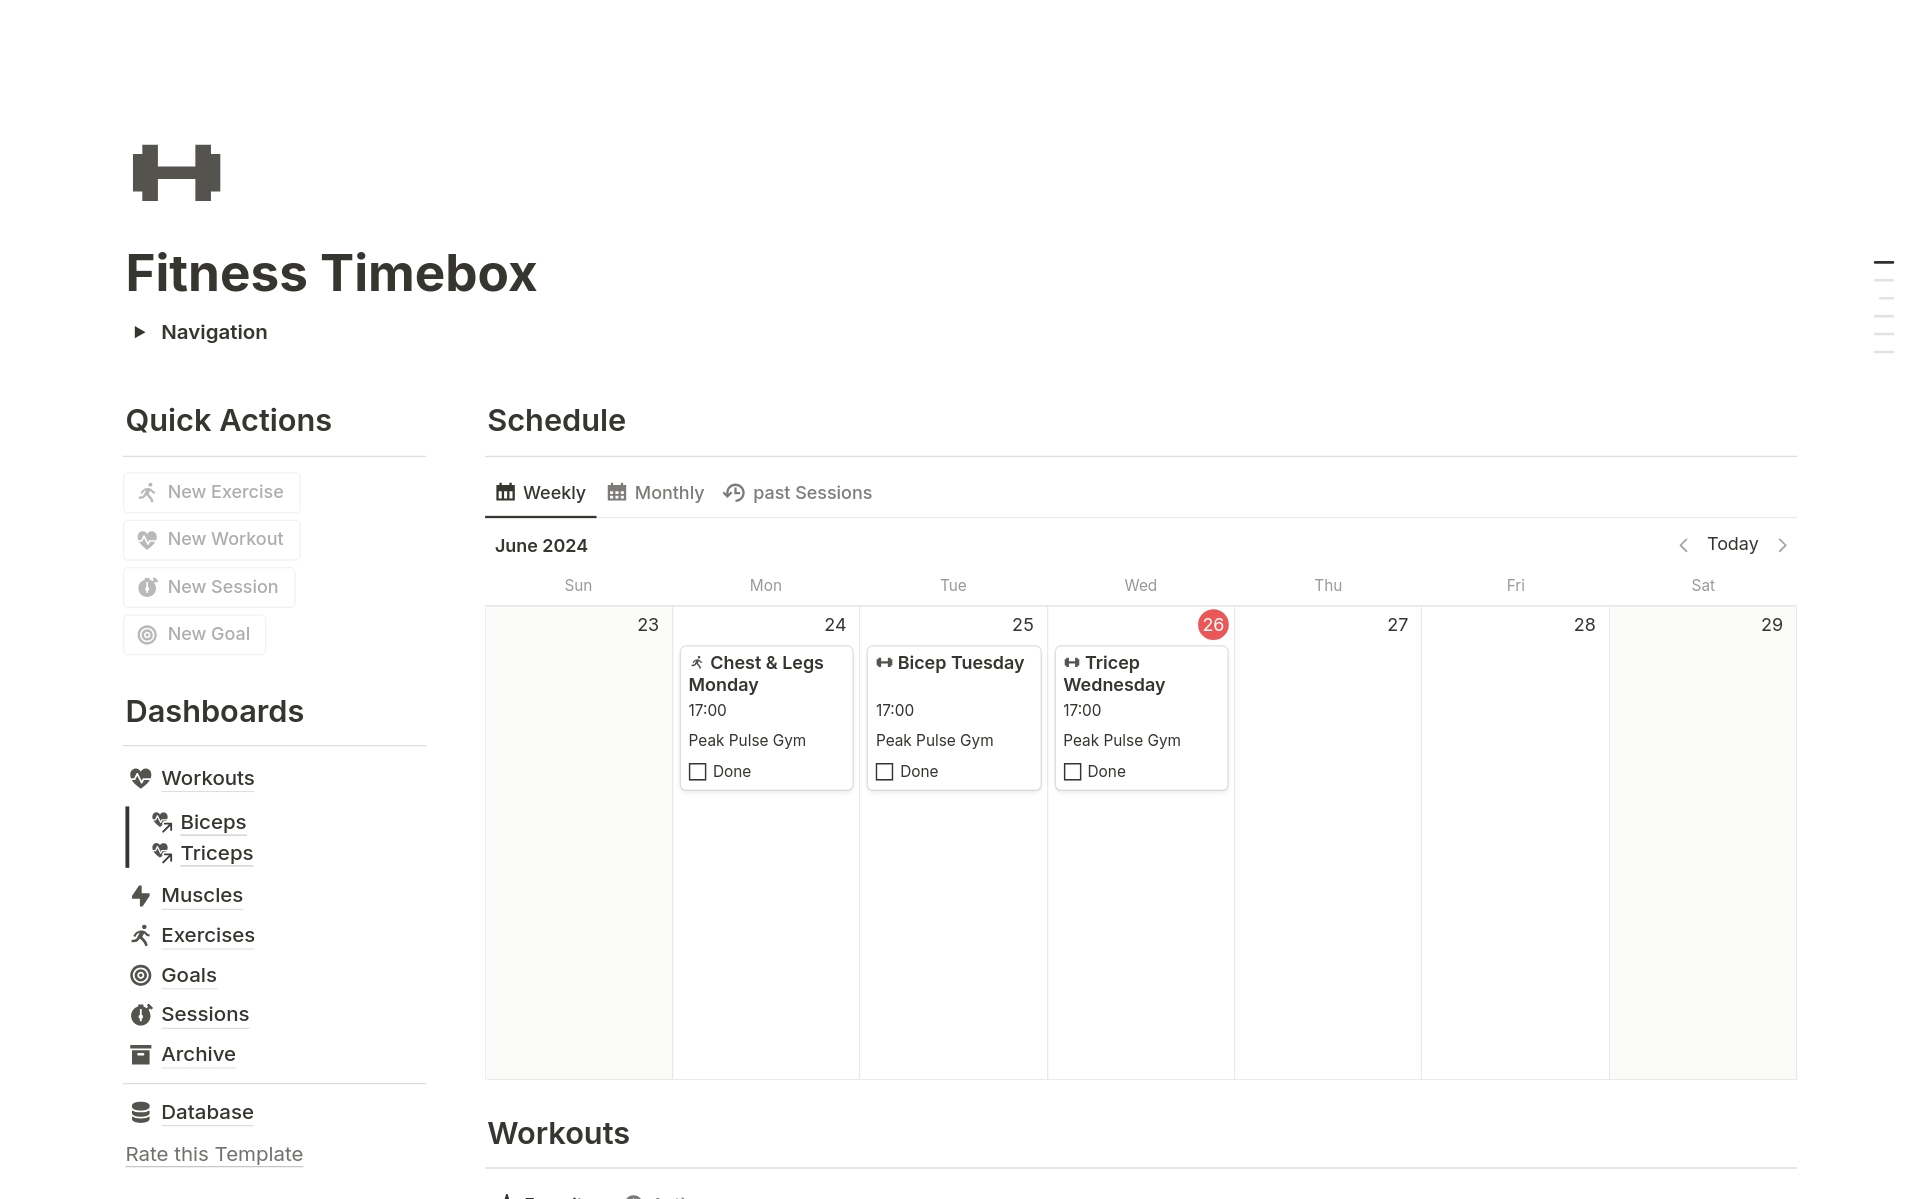 All great athletes have workout schedules and meal plans.
According to Harvard University, Timeboxing is the most effective productivity method.